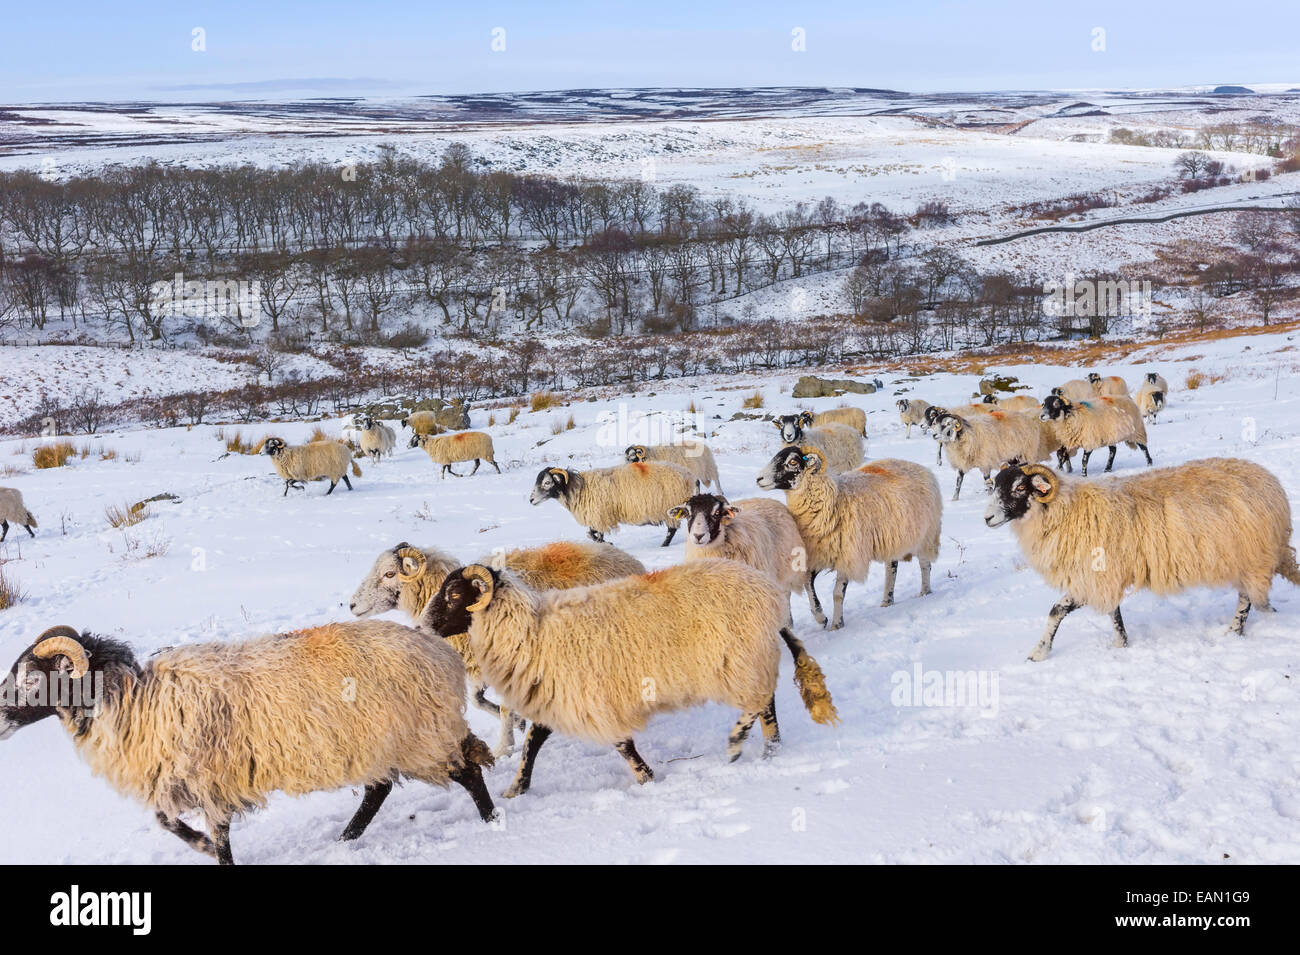 Sheep search for fodder after snow storm in the heart of the North York Moors National Park near Goathland, Yorkshire, UK. Stock Photo